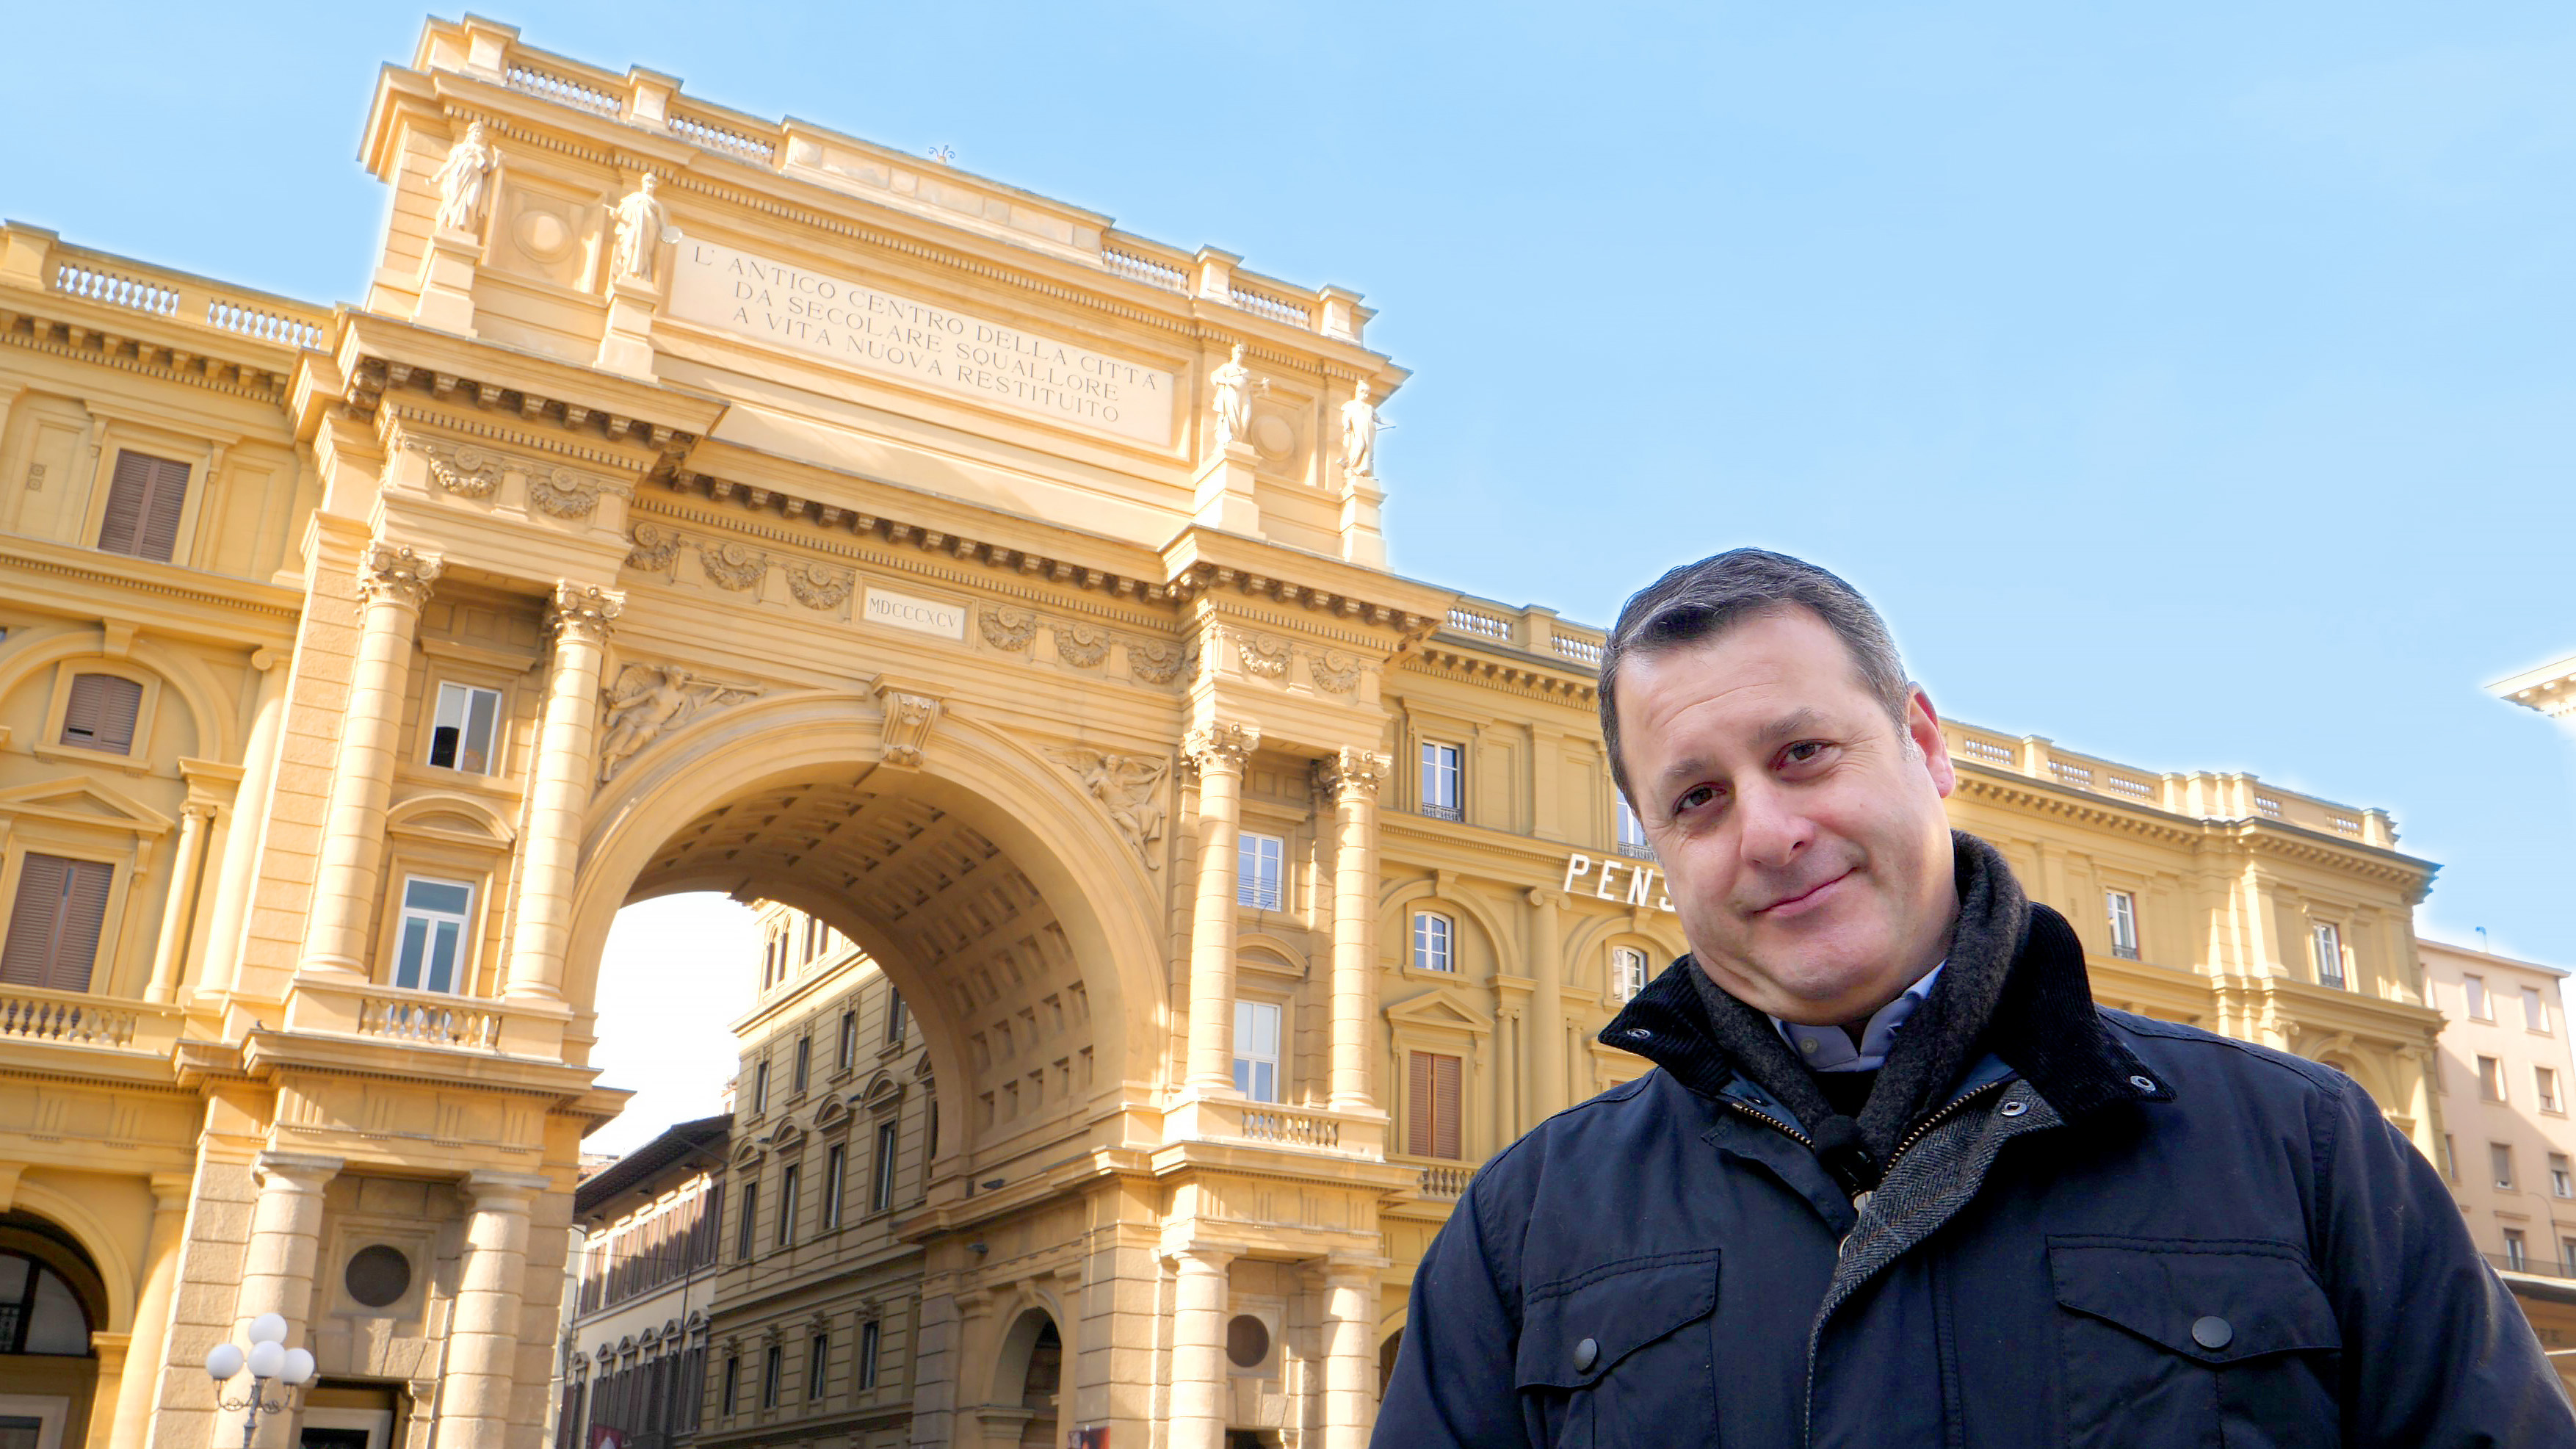 Dr. Rocky Ruggiero introduces the Piazza della Repubblica in Florence, Italy, where the history of Florence “begins and ends.”